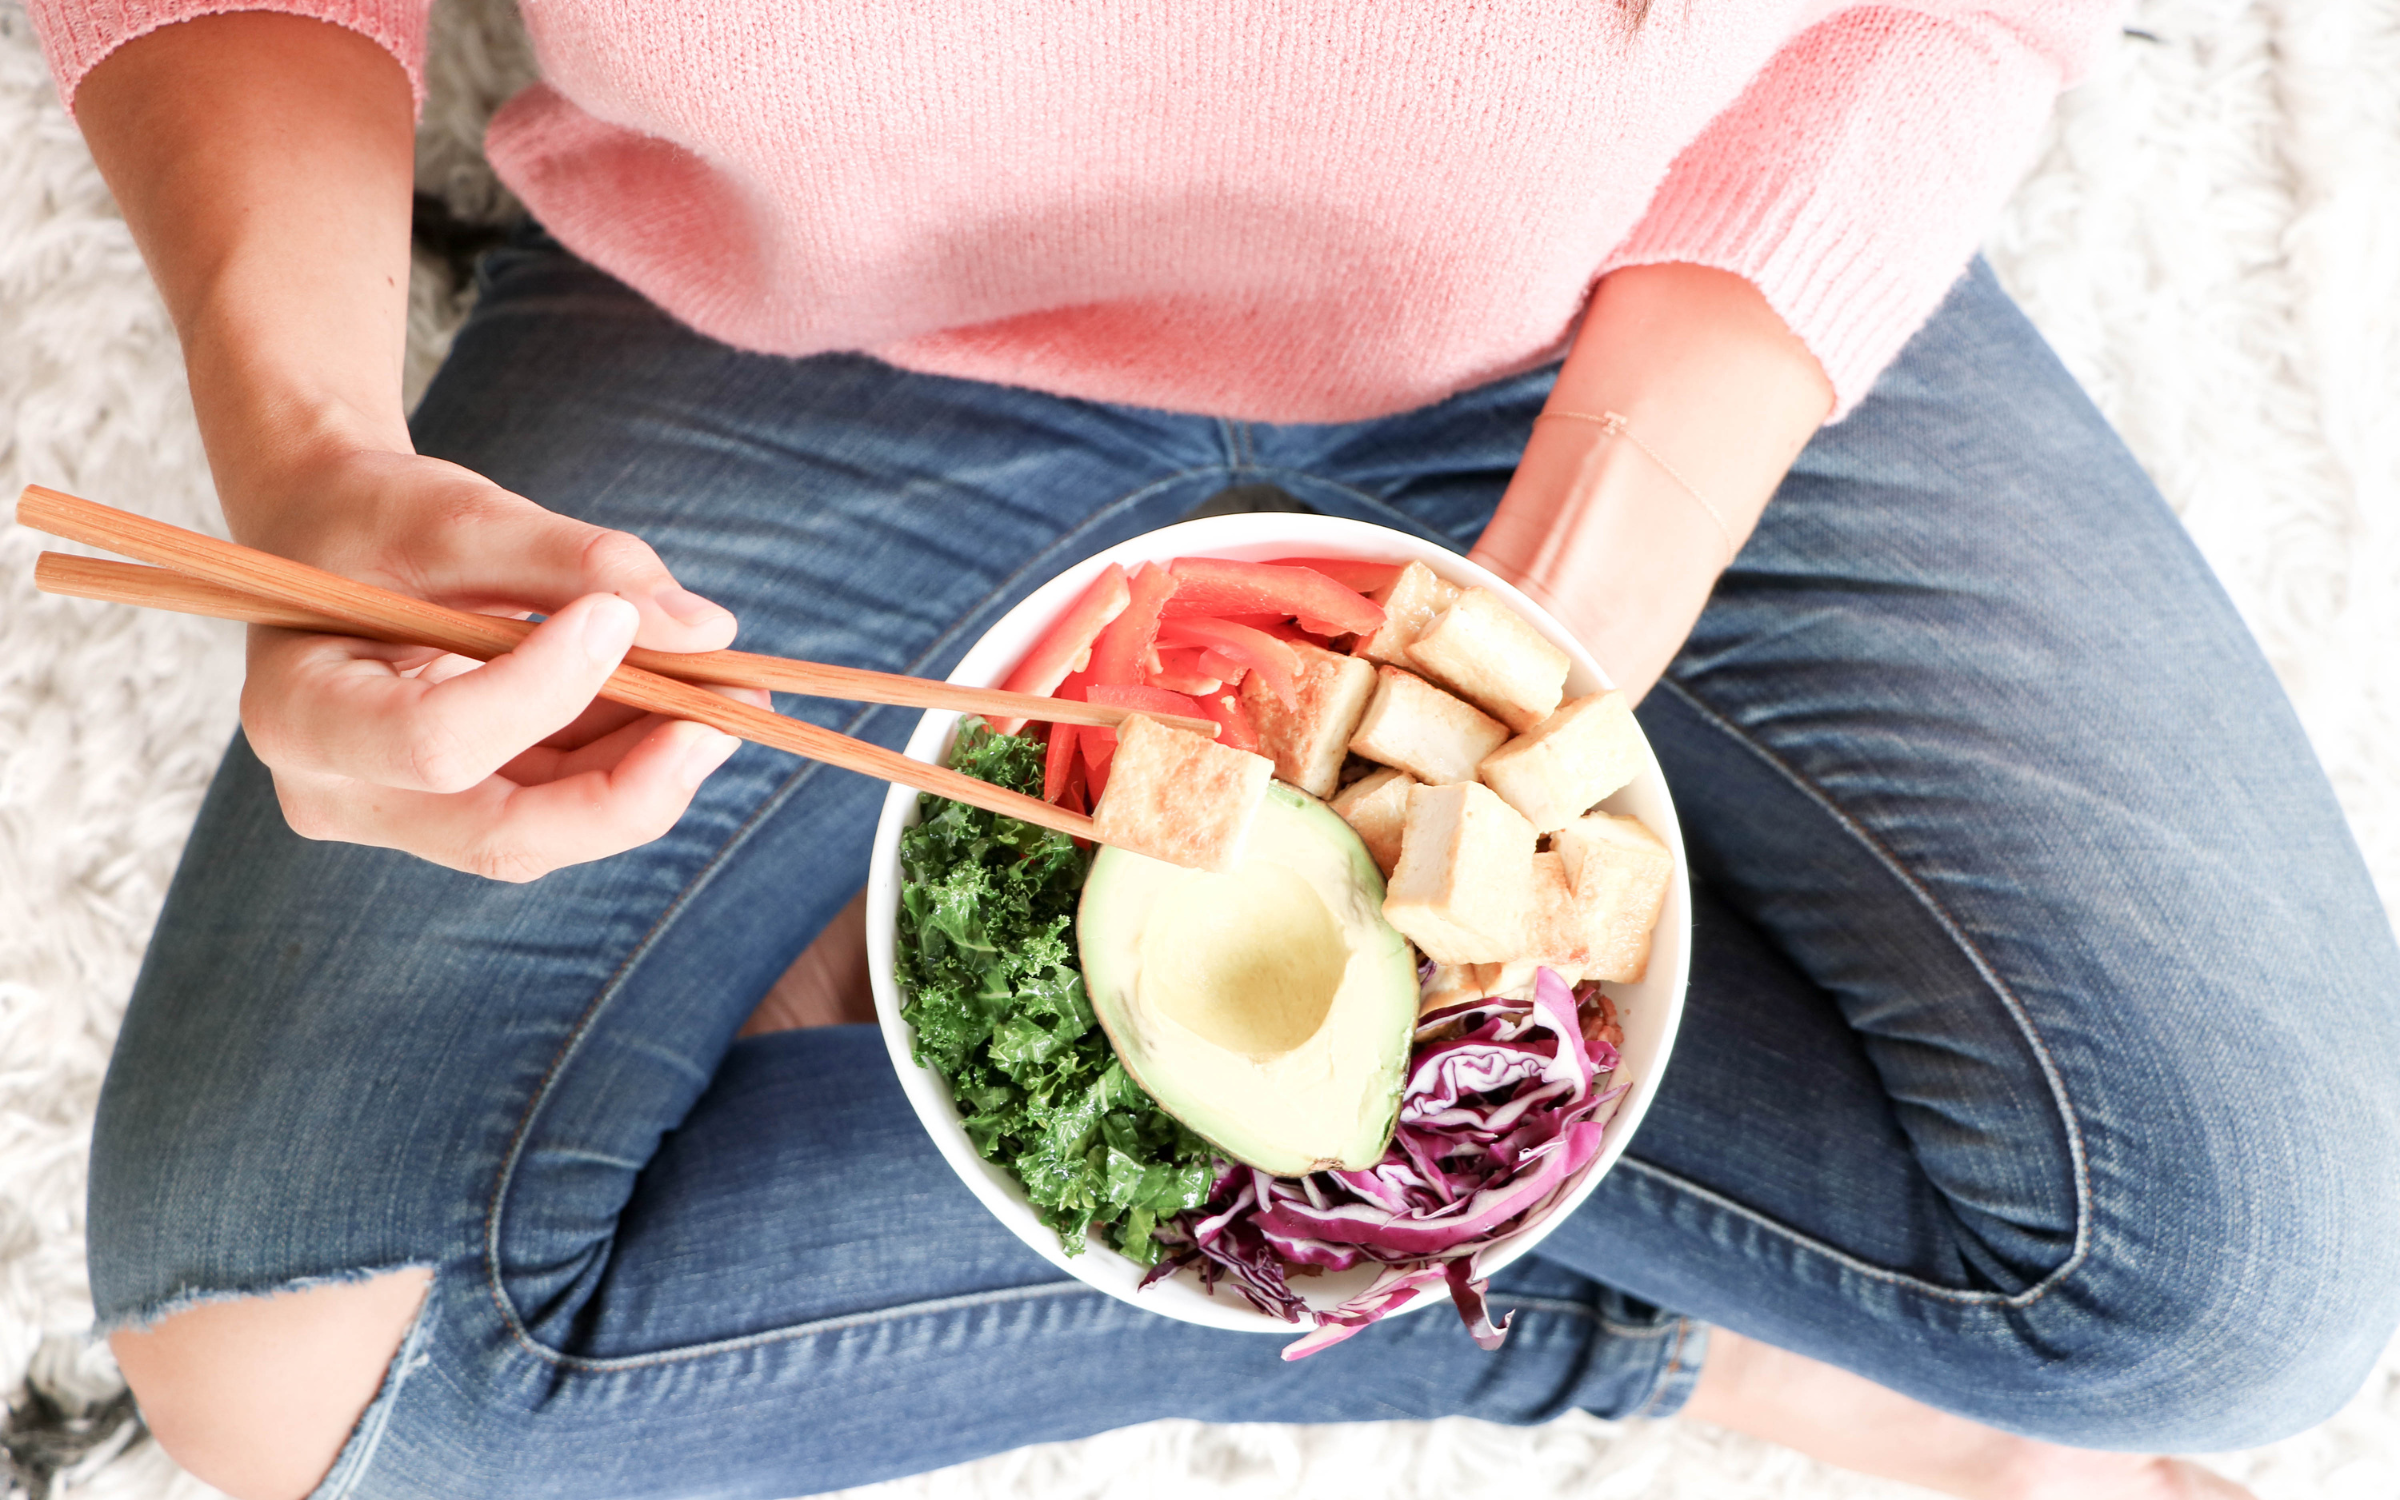 How to Start Intuitive Eating: A Dietitian’s Guide To Ditch Dieting